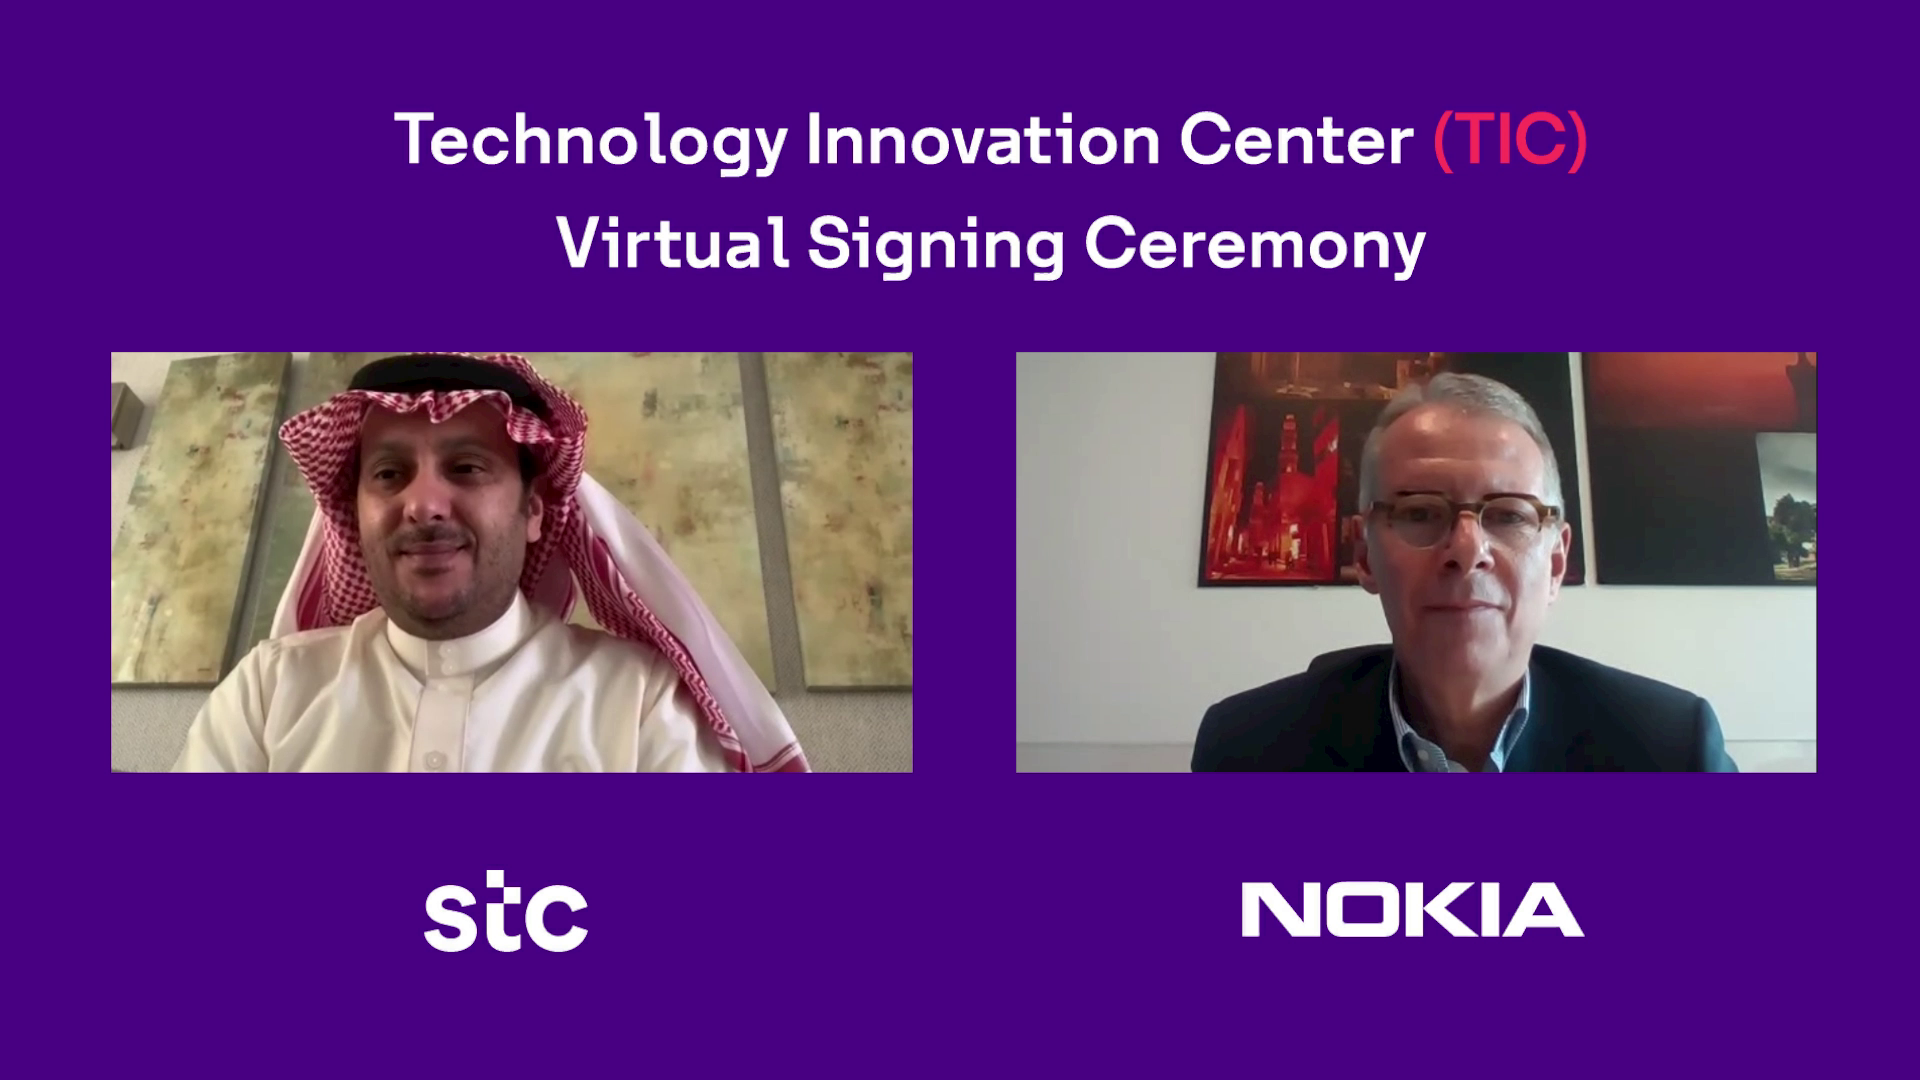 Nokia And stc Launch The Operation Of Technology Innovation Center To Stimulate Innovation